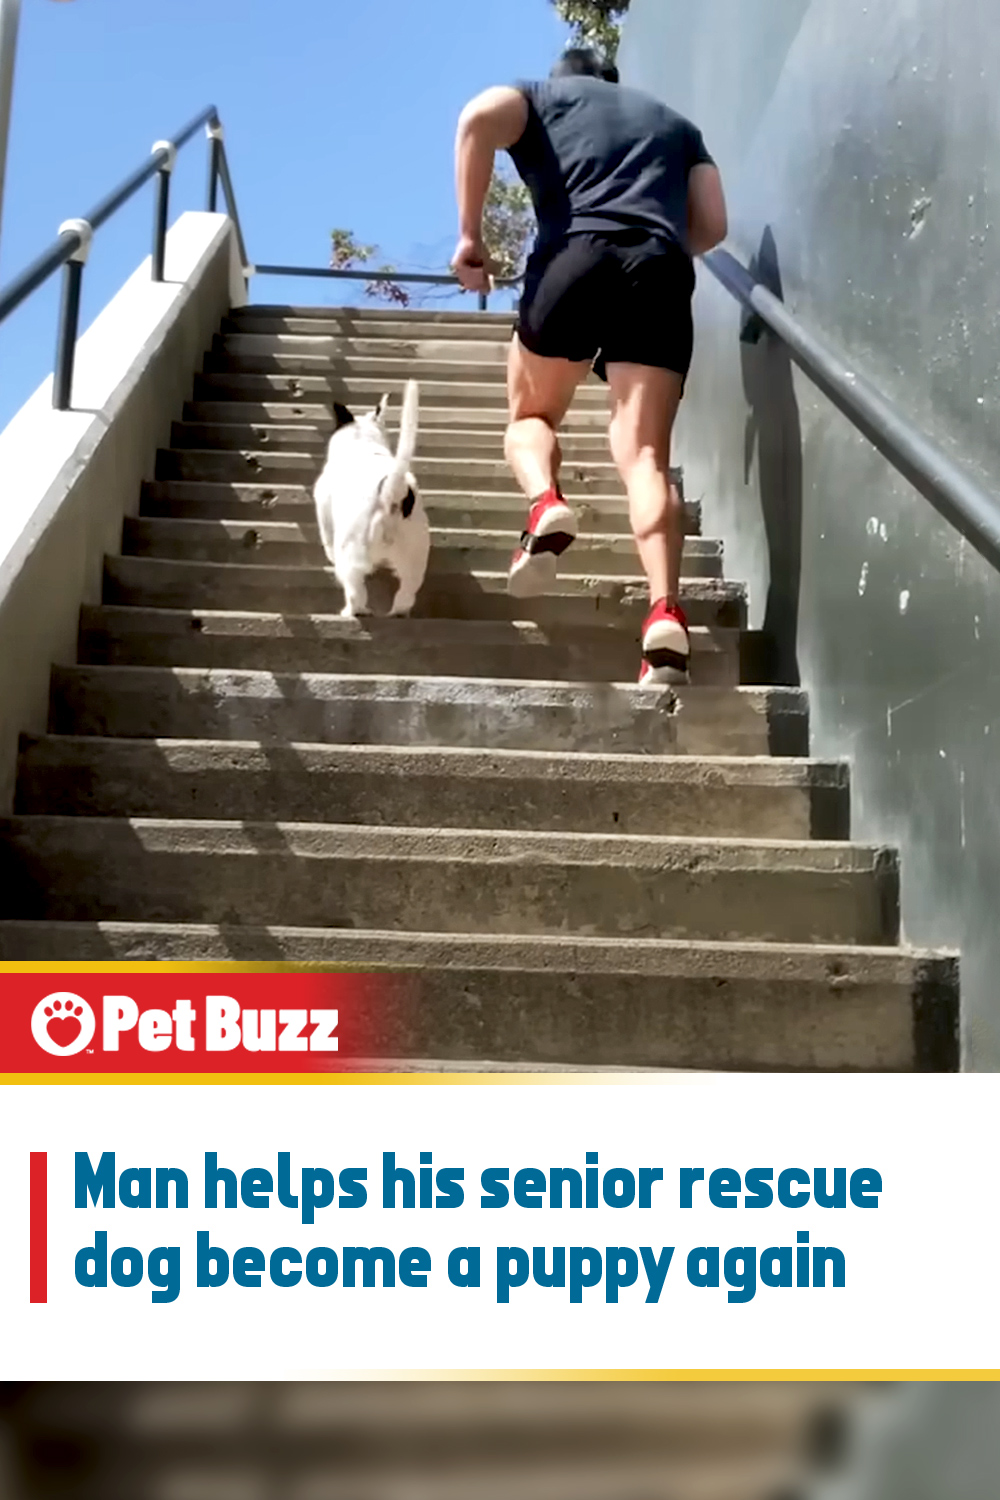 Man helps his senior rescue dog become a puppy again